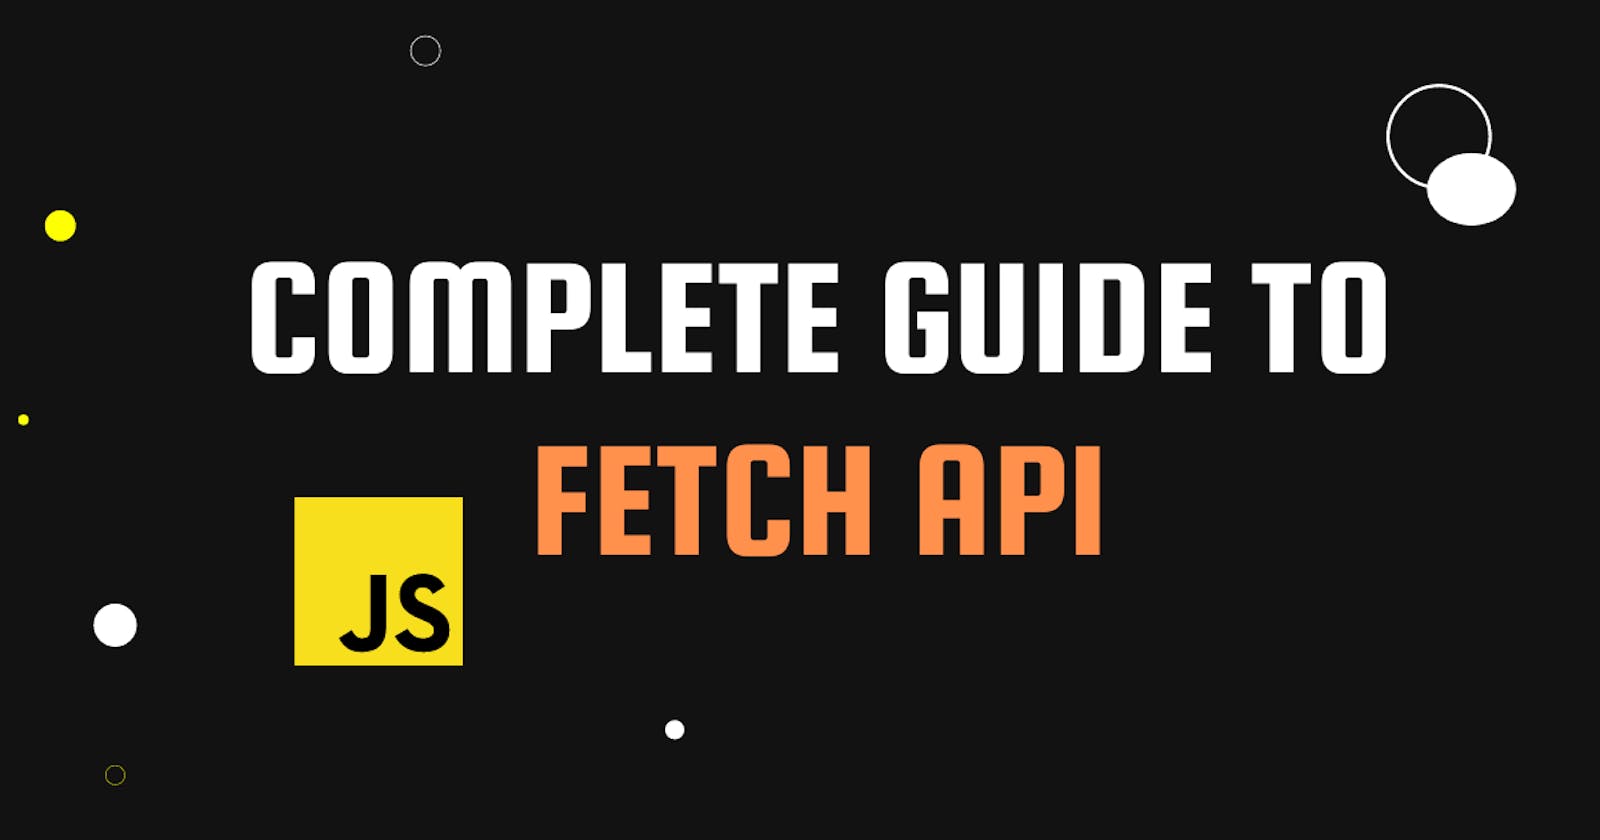 Complete guide to Fetch API